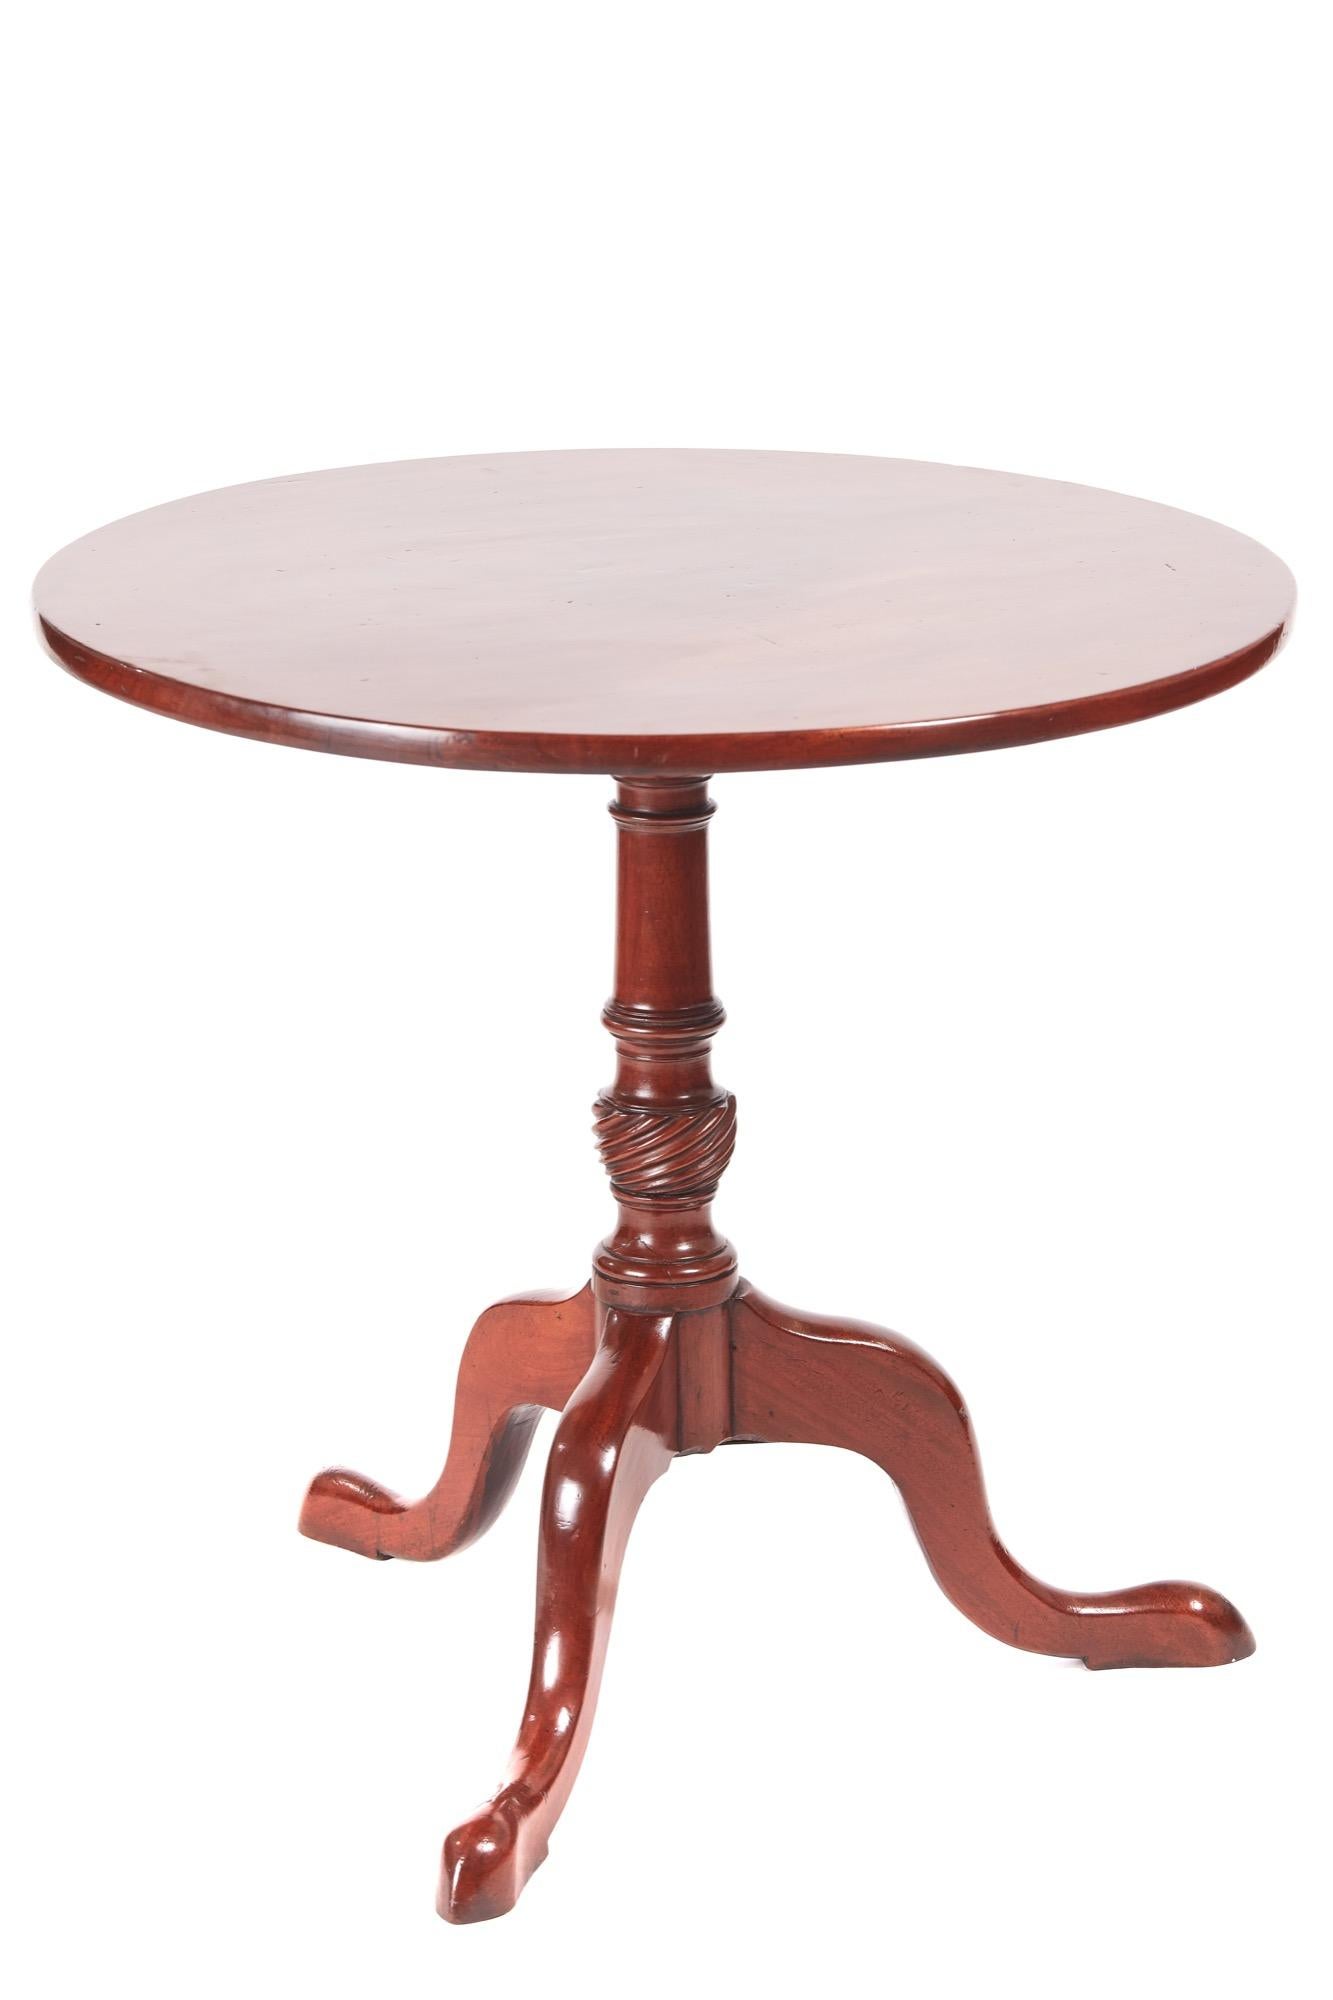 George III antique mahogany tripod table with a solid round mahogany top supported by a turned and reeded pedestal, raised on three shaped cabriole legs with pad feet.

Lovely color and condition

WORLDWIDE SHIPPING

We are able to ship this item